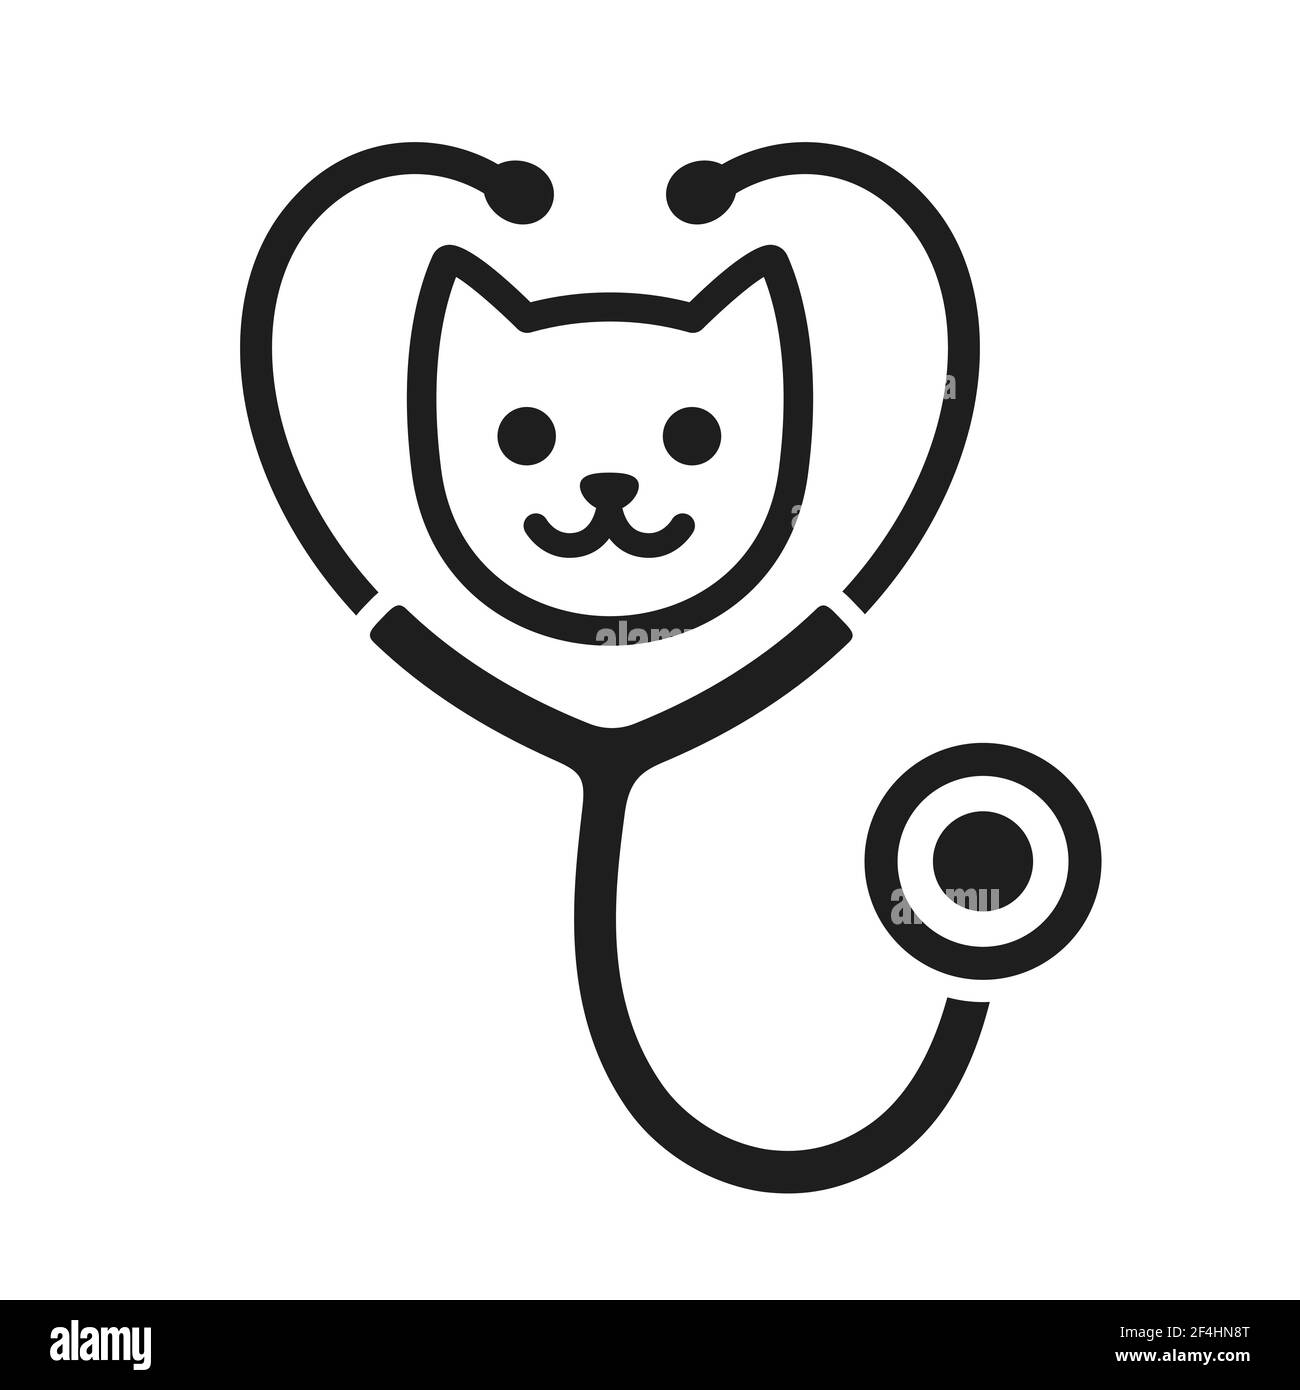 Stethoscope silhouette with cat face icon. Veterinary clinic logo, isolated vector illustration. Stock Vector